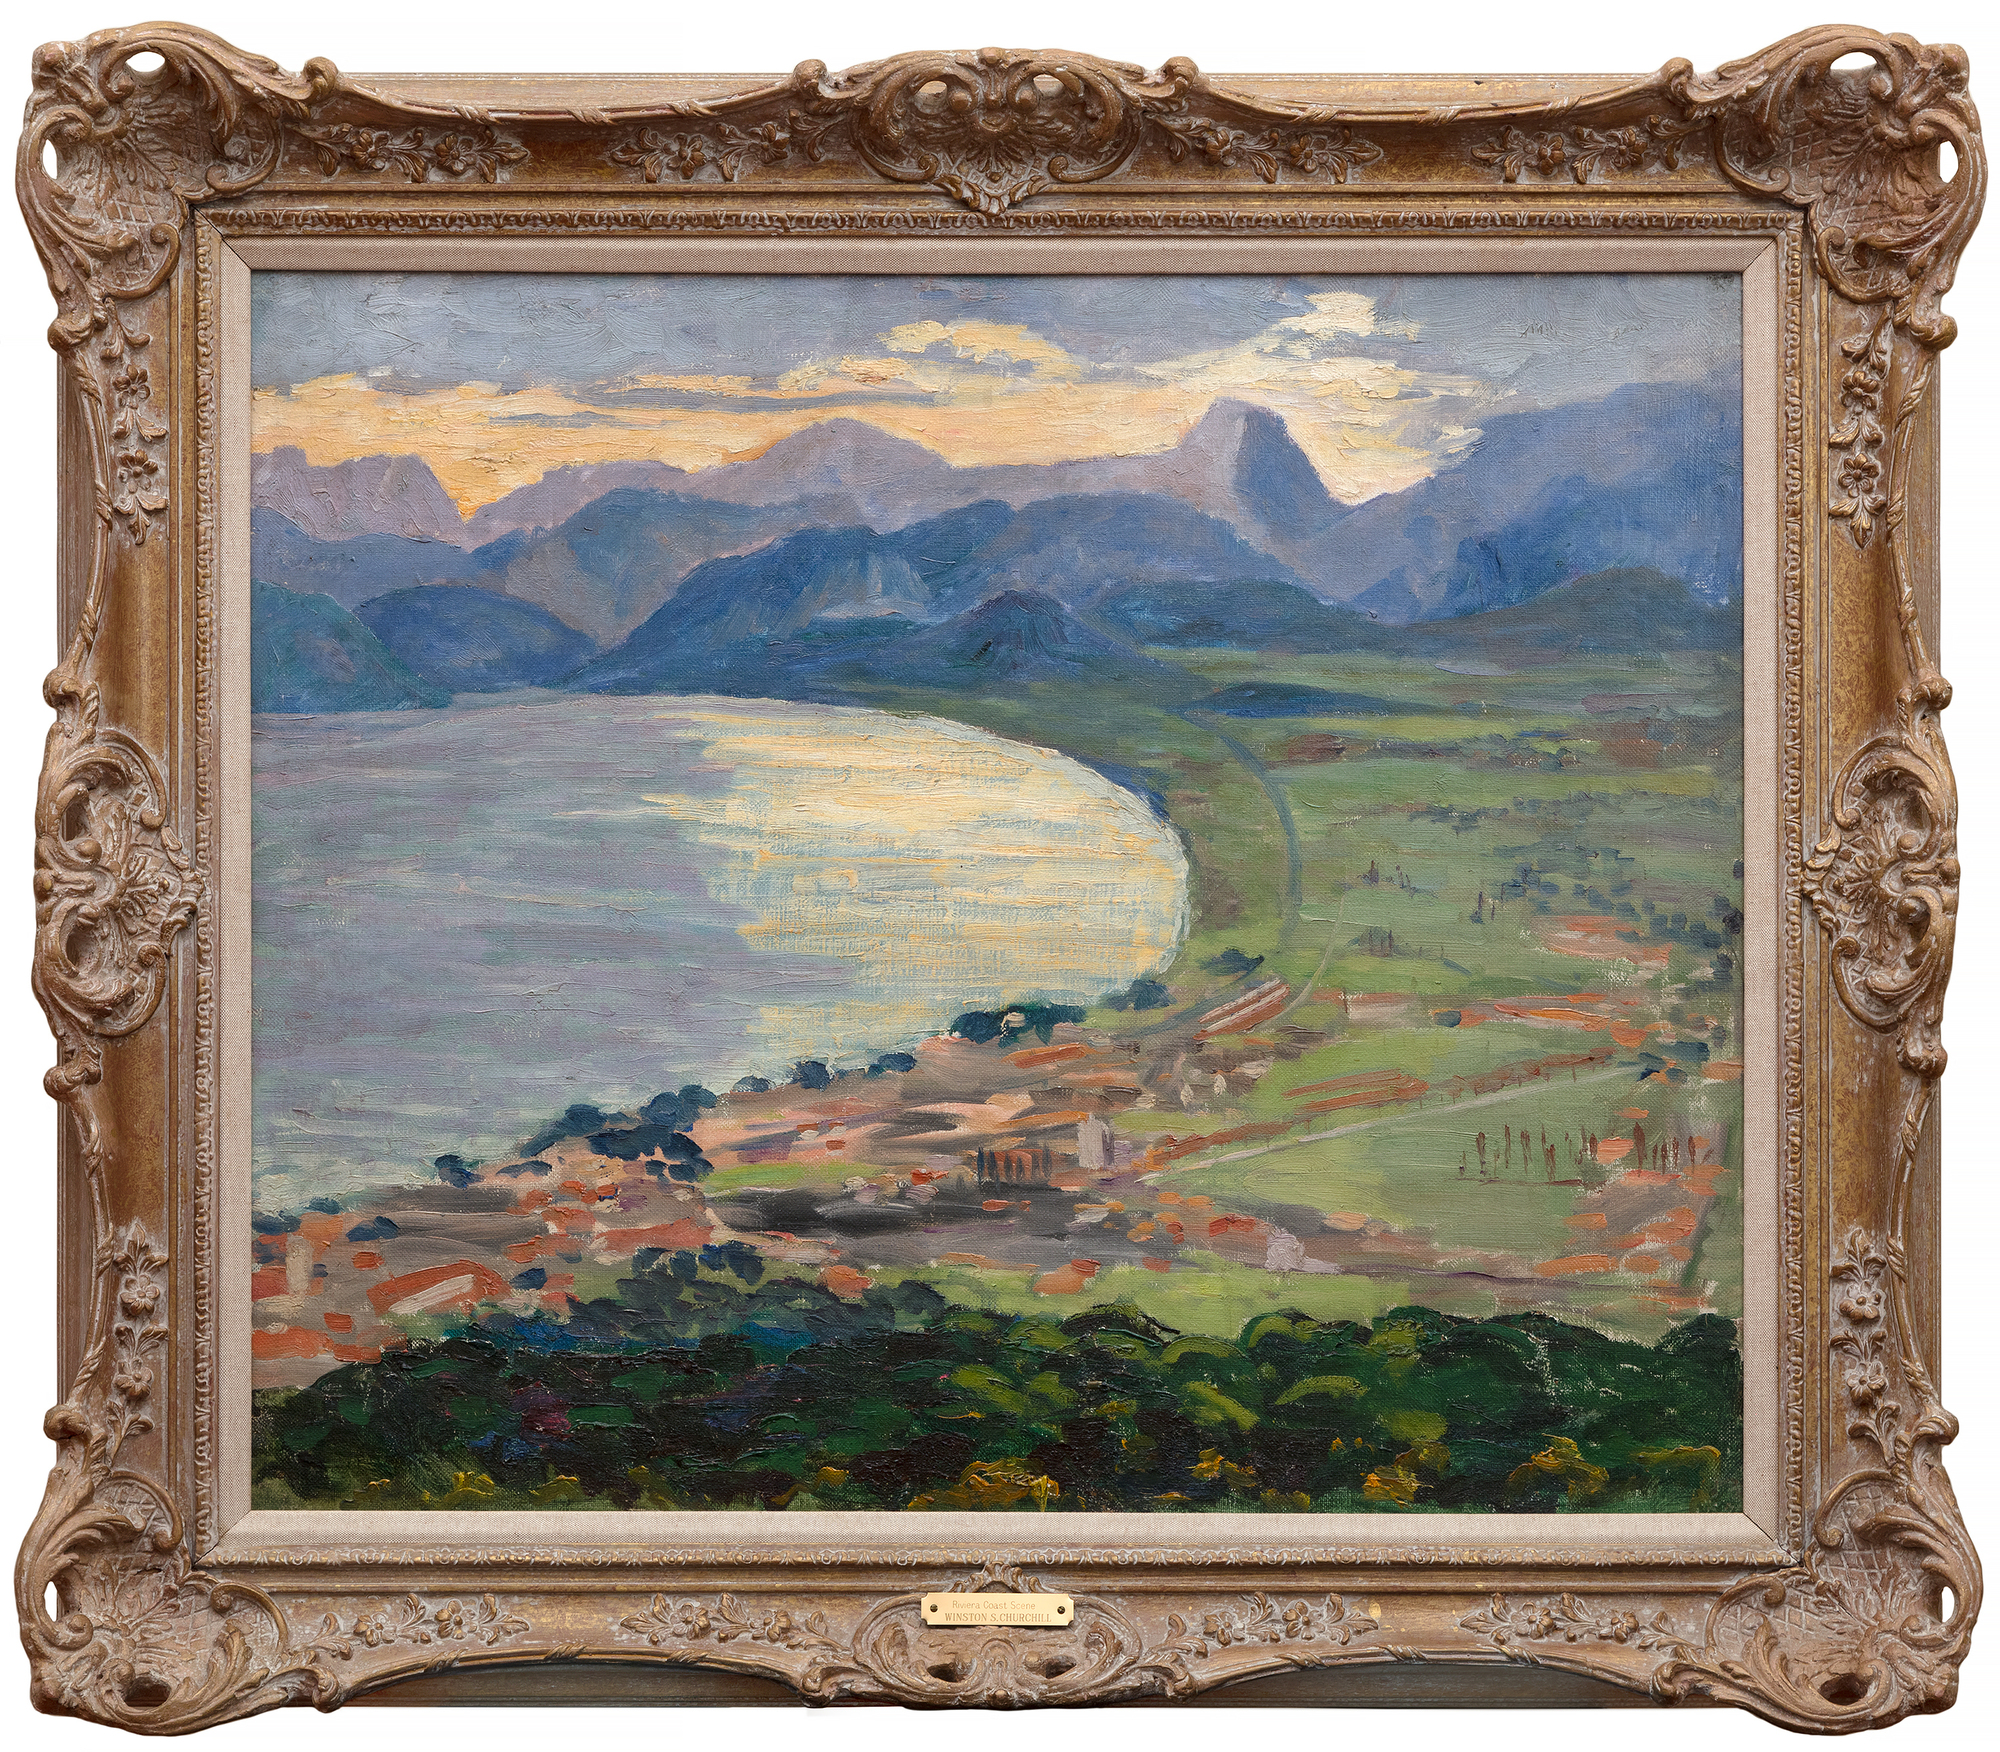 Painted from an unusually high vantage, “Riviera Coast Scene” vividly conveys the formidable distance and breadth of the scene from the perch where he set his easel.  Interestingly, Paul Rafferty did not include this painting in his book Winston Churchill: Painting on the French Riviera, believing it could likely be a scene from the Italian Lake District, where Churchill also painted in the same time period.&lt;br&gt;&lt;br&gt;Paintings by Churchill can function as a glimpse into his extensive travels and his colorful life. Churchill most likely painted “Riviera Coast Scene” during a holiday at Chateau de l’Horizon, home of Maxine Elliot, a friend of his mother. Elliot, originally from Rockland, Maine, was a successful actress and socialite.&lt;br&gt;&lt;br&gt;Within this painting, we see the influence of the Impressionists who utilized unusual viewpoints, modeled after Japanese woodblock prints, but also evidence of their attempts to push the boundaries of the landscape genre